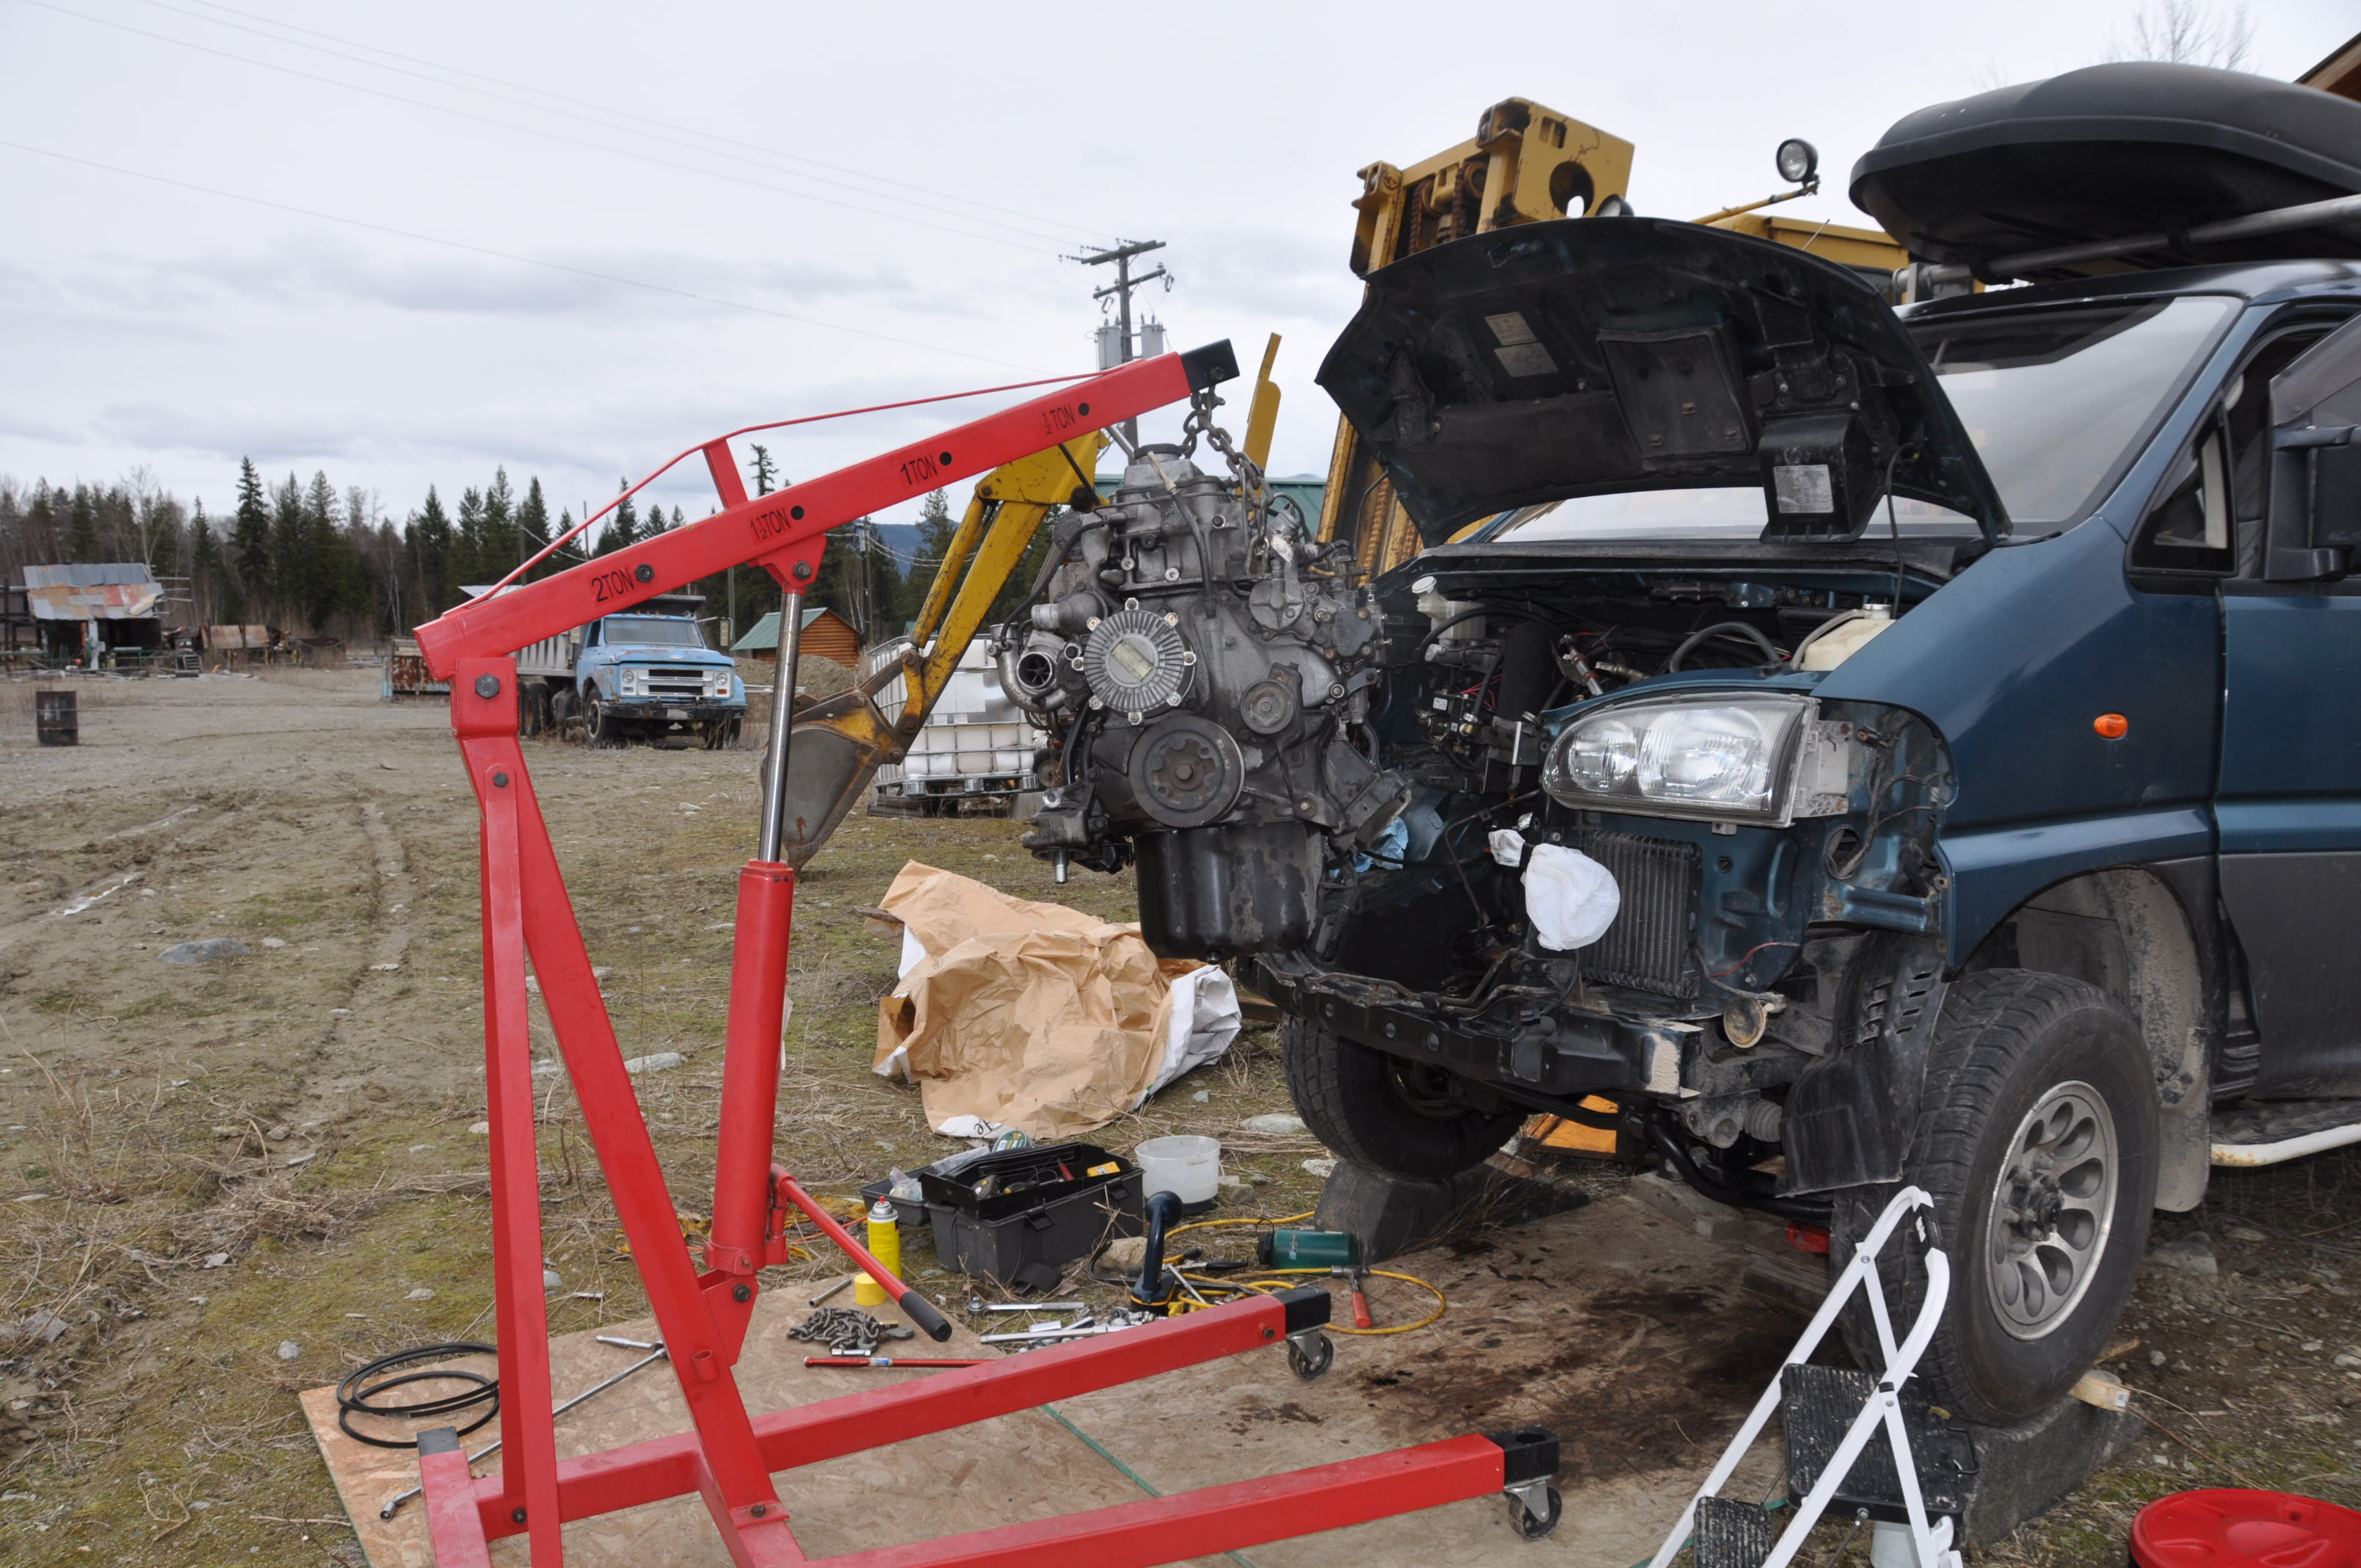 Pulling the Delica Engine … Started